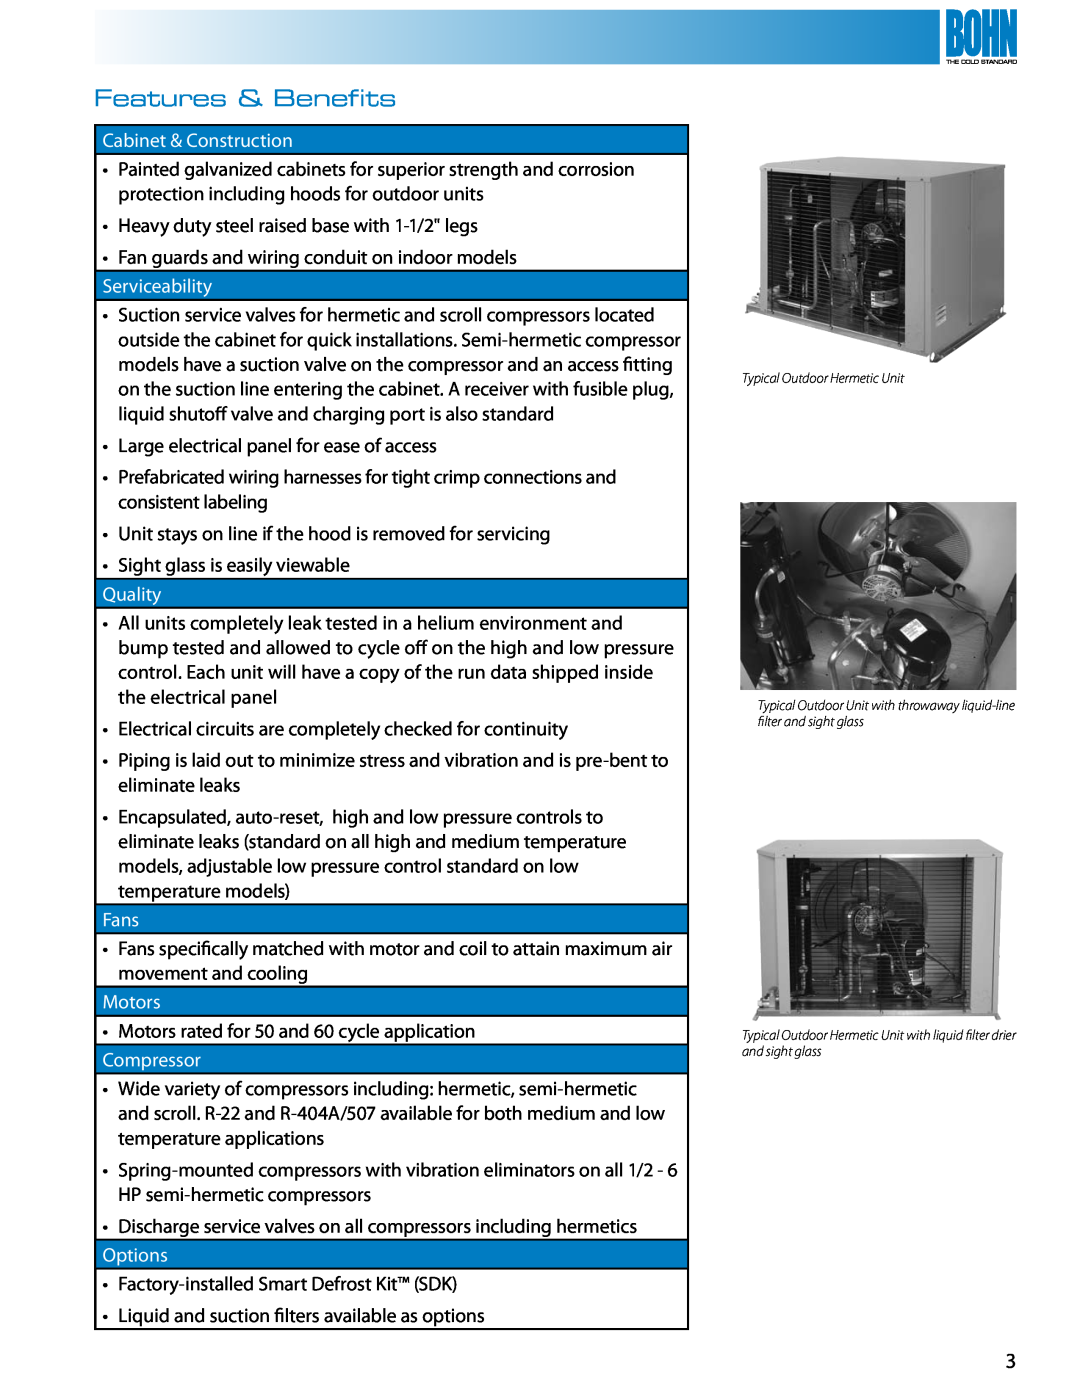 Heatcraft Refrigeration Products Air-Cooled Condensing Units Features & Benefits, Cabinet & Construction, Serviceability 